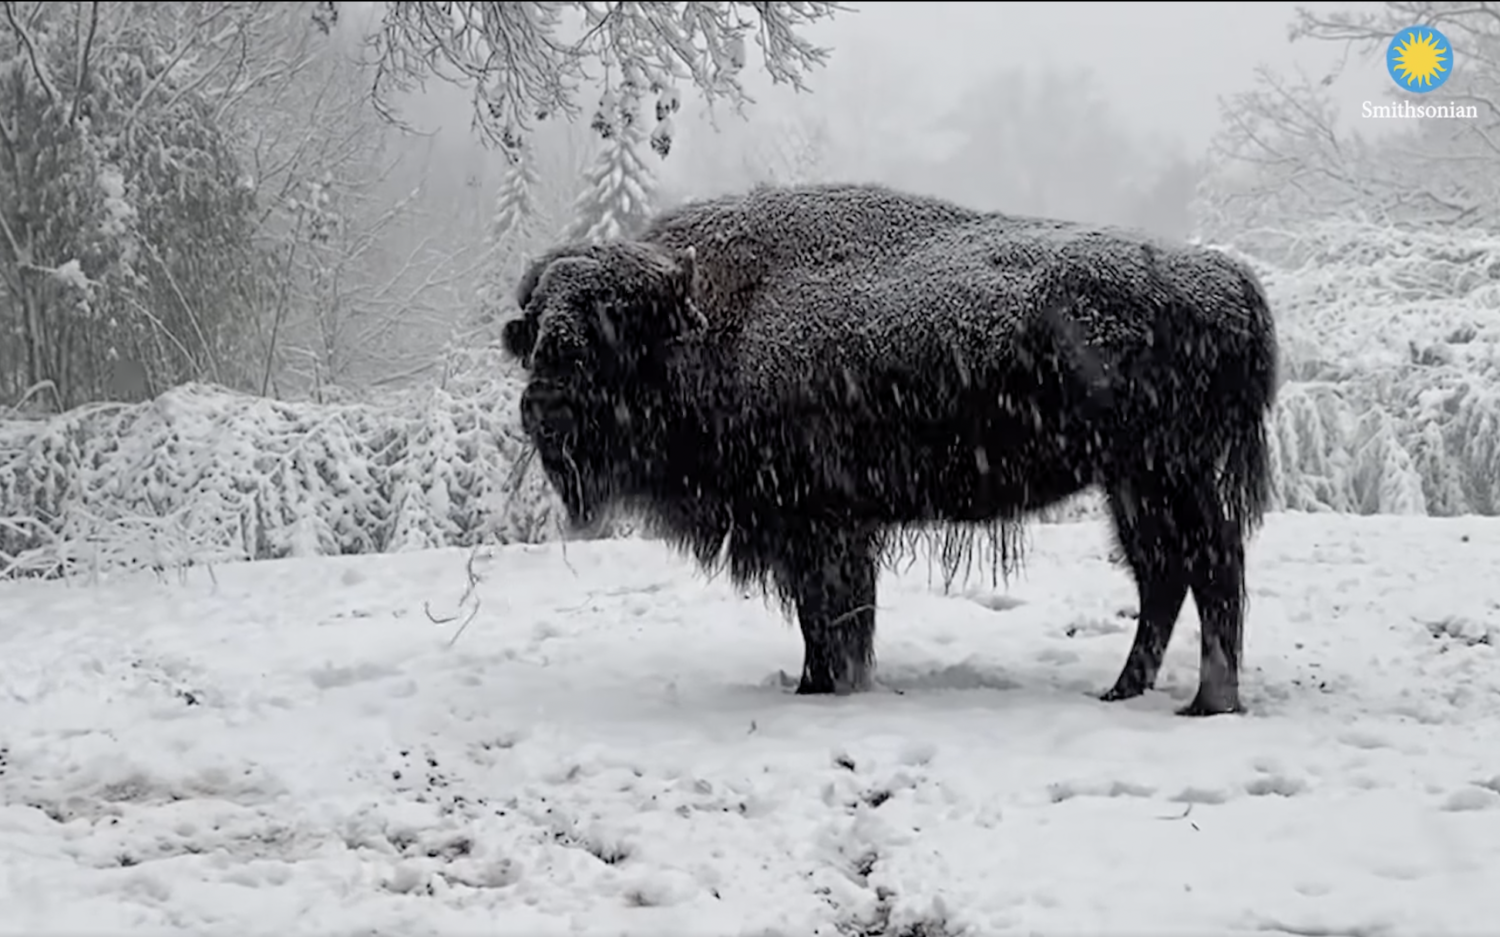 Bison at National Zoo plays in snow